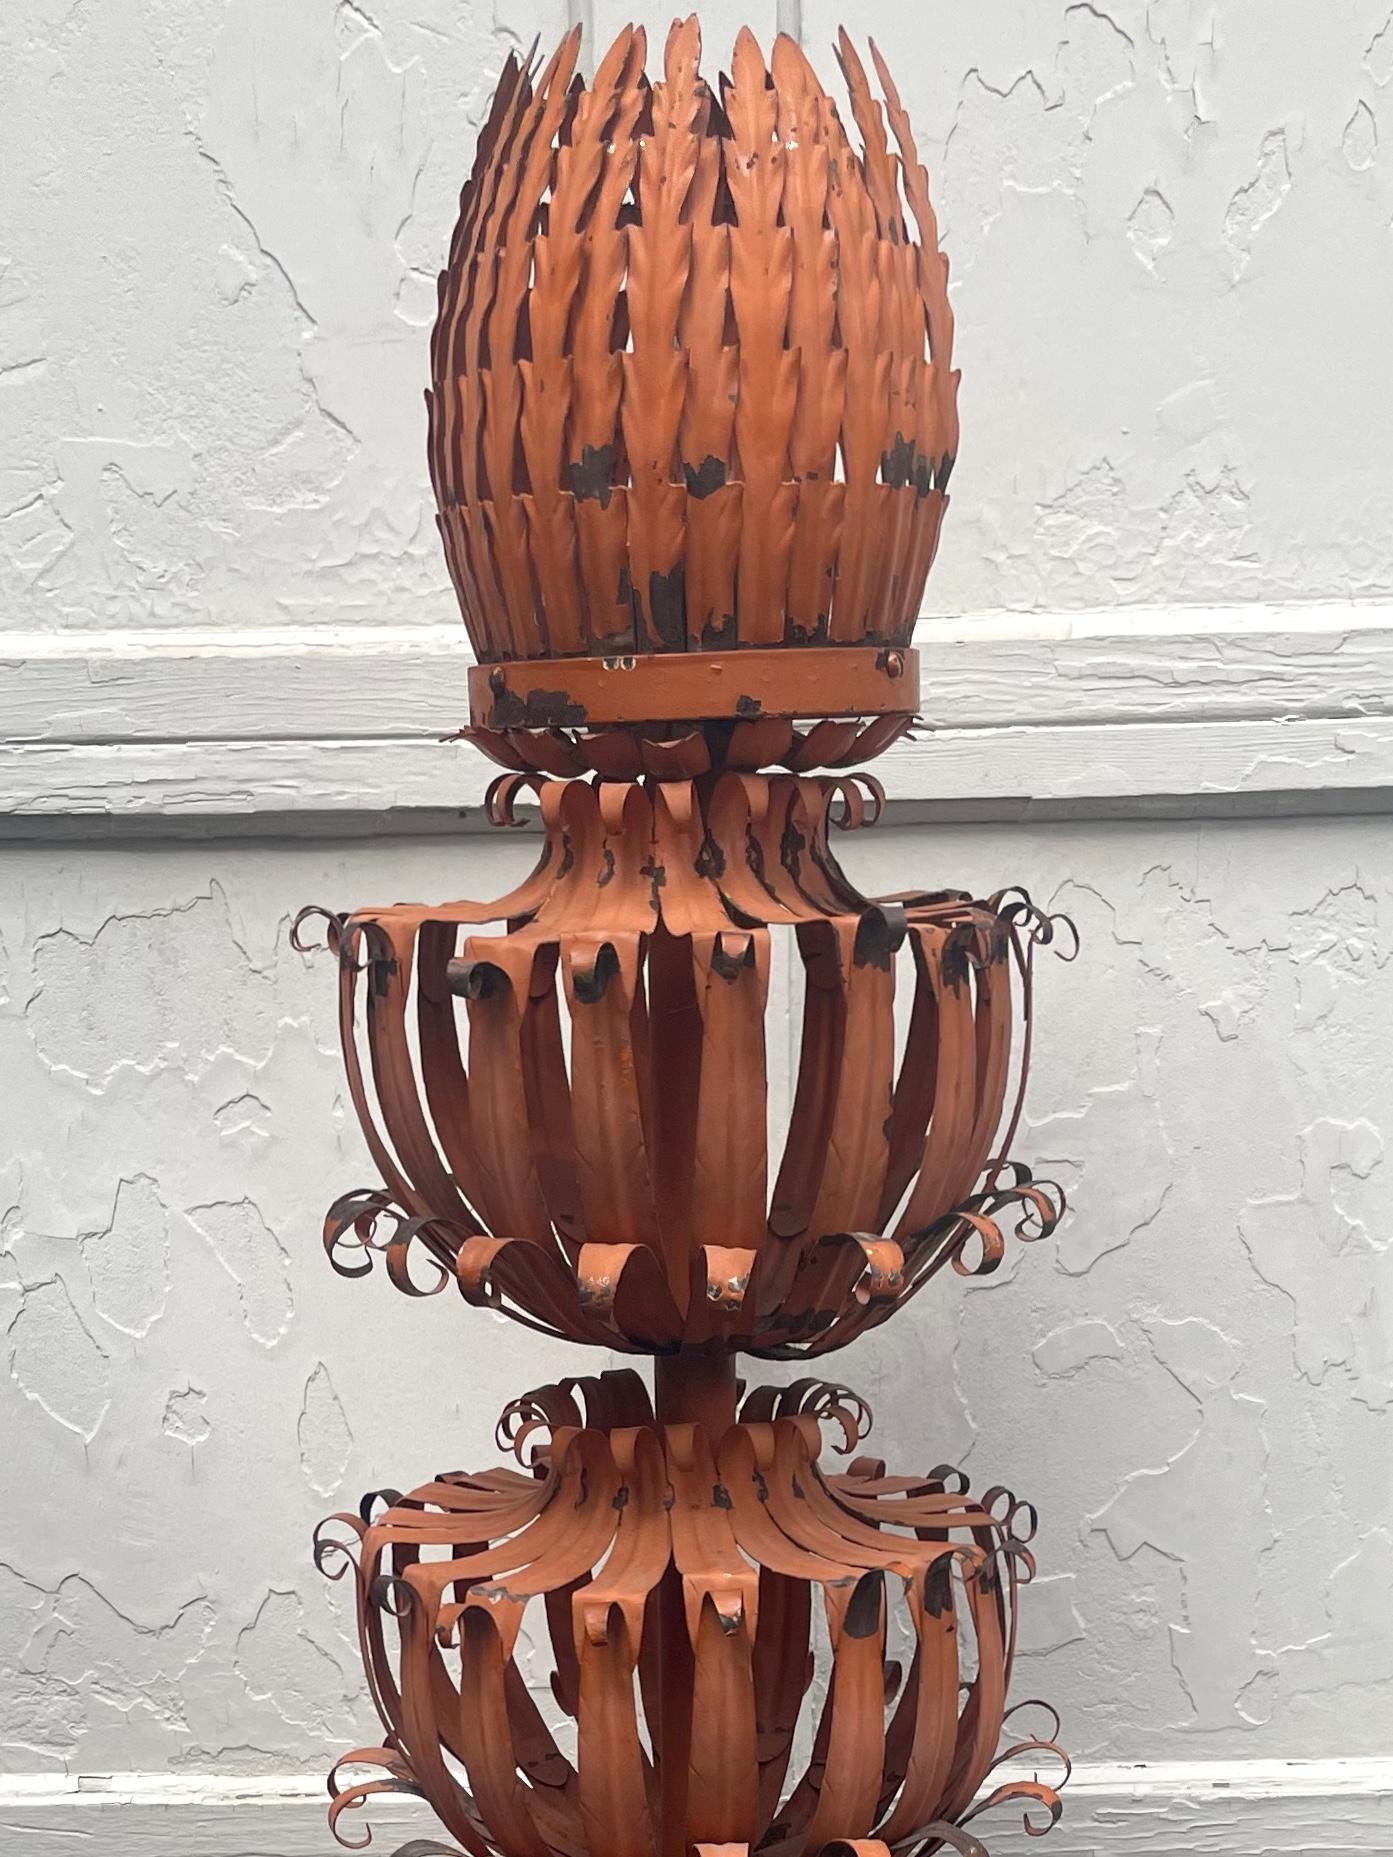 Italian painted tole torchiere. Fantastical botanical inspired six tier open basket work burnt orange painted tole torchiere sprouting large artichoke form finial enclosing electrical bulb which when illuminated cast a beautiful reflective pattern.